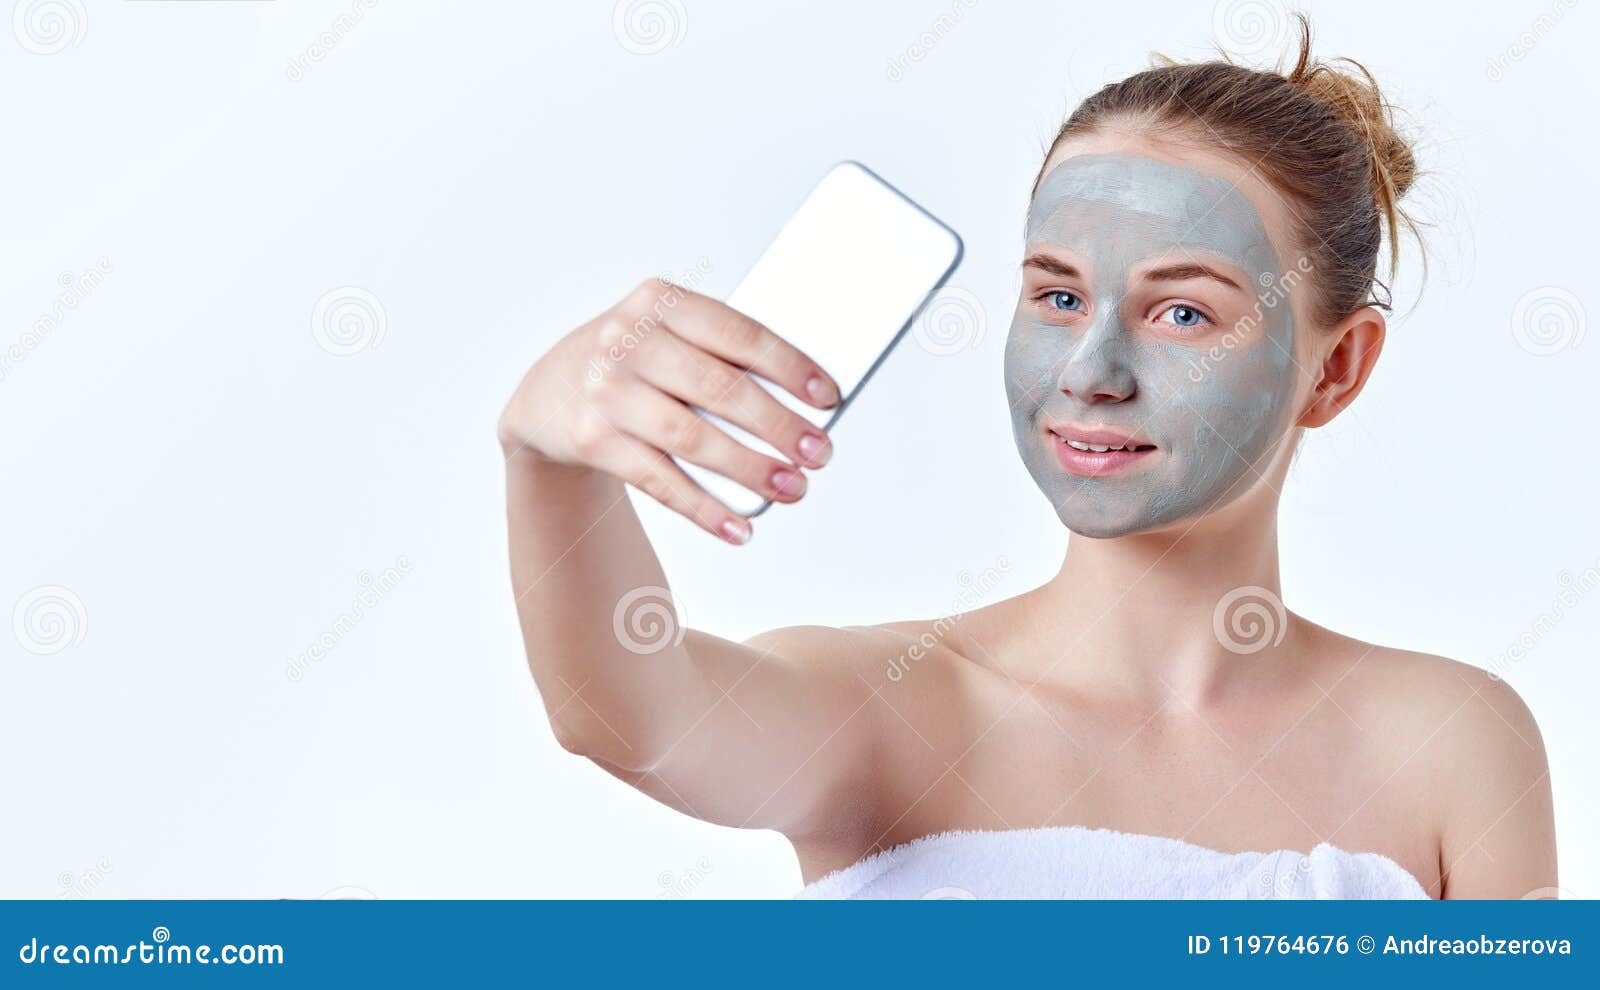 vlogging concept. young redhead teenage girl with dried face mask on her face using her smart phone to make video for her vlog.